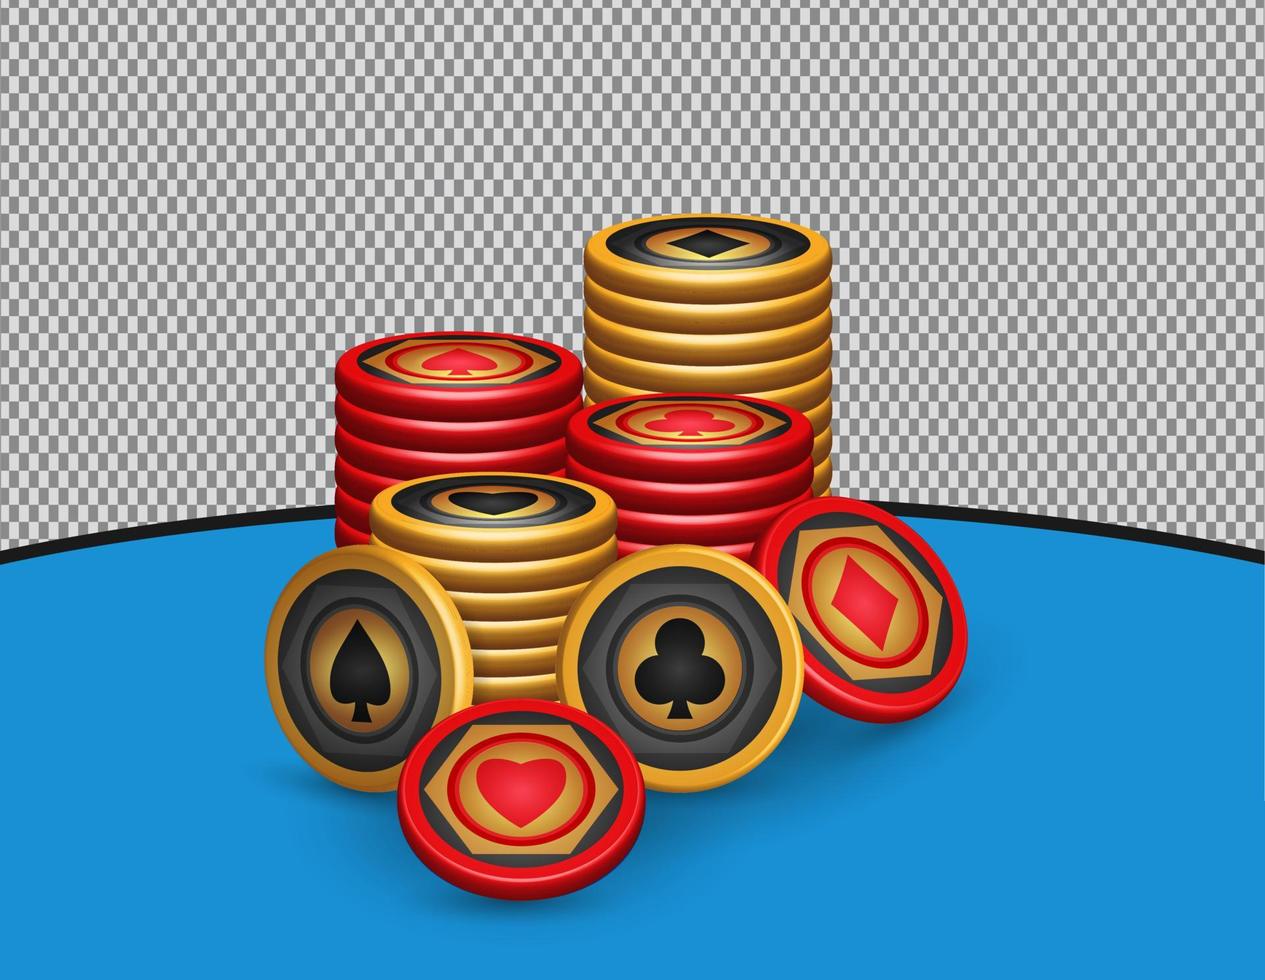 Gold and red poker chip set, with symbols Diamonds, sticks, hearts, spades, game design elements, 3d vector illustration, stack of chips for casino